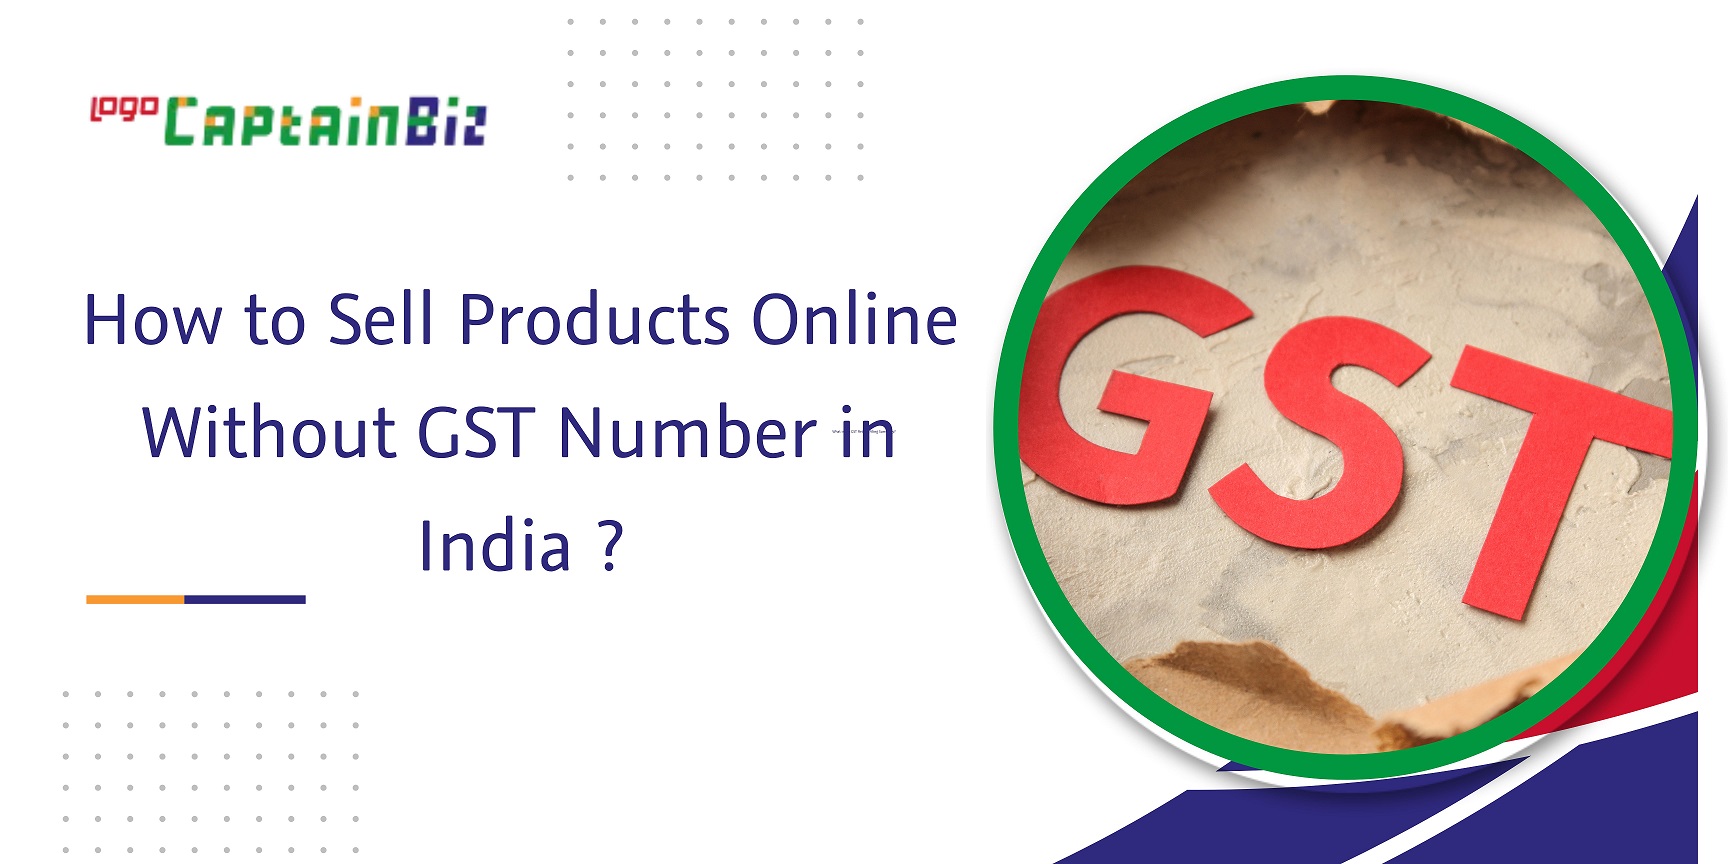 CaptainBiz: how to sell products online without gst number in india